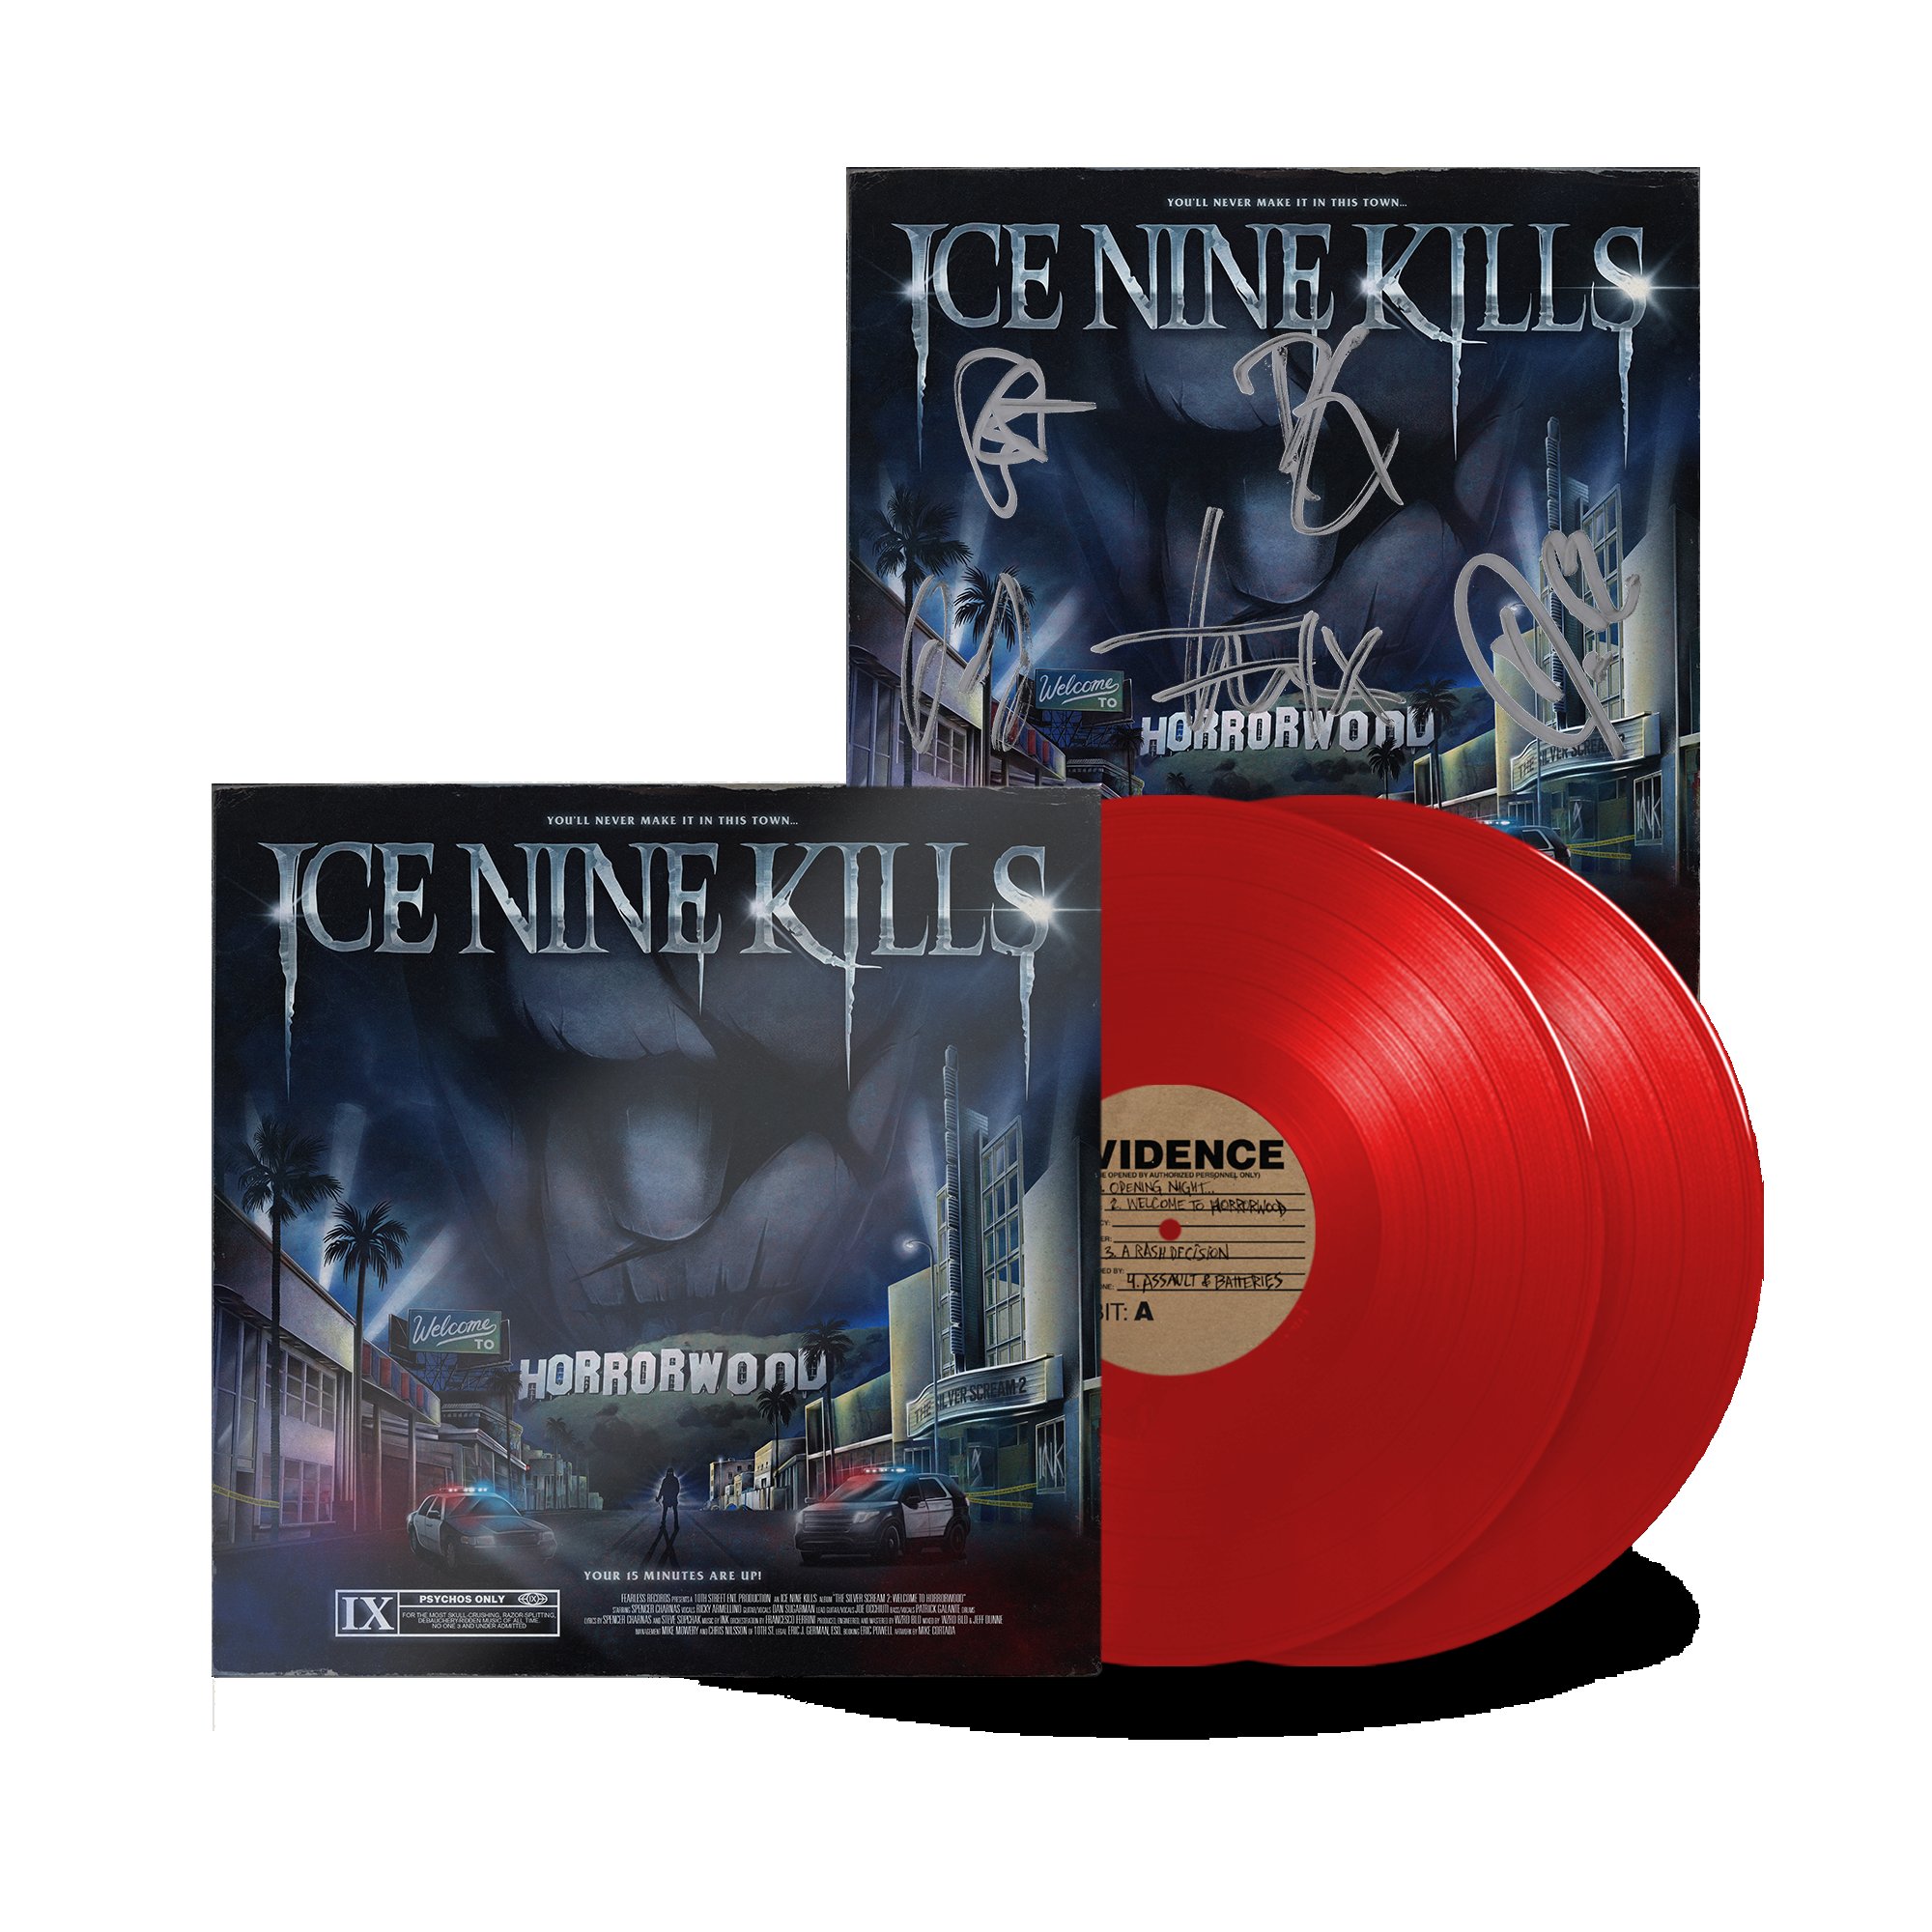 ICE NINE KILLS on Twitter: "European pre-order the Lady In Red vinyl and receive a signed Welcome to Horrorwood print. Pre-order now through @BanquetRecords https://t.co/oQS2Dp1fHb / X